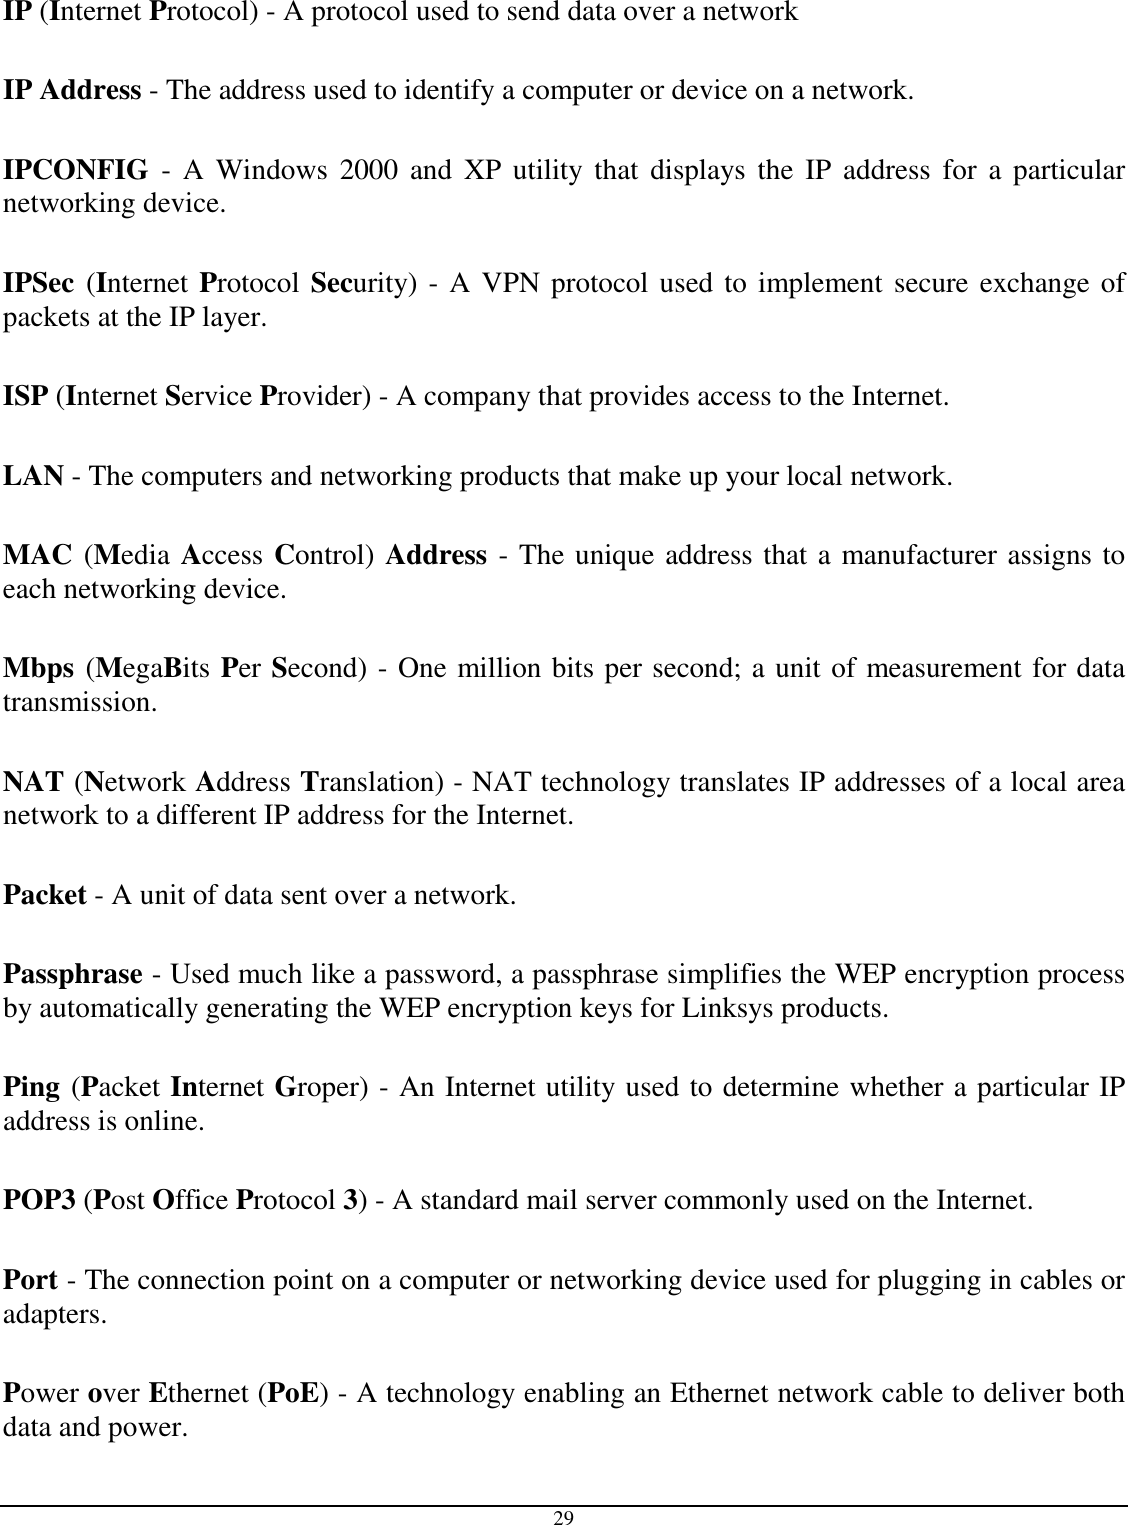  29  IP (Internet Protocol) - A protocol used to send data over a network  IP Address - The address used to identify a computer or device on a network.  IPCONFIG  -  A  Windows  2000  and XP utility that  displays  the IP  address  for  a  particular networking device.  IPSec (Internet Protocol Security) - A VPN protocol used to implement secure exchange of packets at the IP layer.  ISP (Internet Service Provider) - A company that provides access to the Internet.  LAN - The computers and networking products that make up your local network.  MAC (Media Access Control) Address - The unique address that a manufacturer assigns to each networking device.  Mbps (MegaBits Per Second) - One million bits per second; a unit of measurement for data transmission.  NAT (Network Address Translation) - NAT technology translates IP addresses of a local area network to a different IP address for the Internet.  Packet - A unit of data sent over a network.  Passphrase - Used much like a password, a passphrase simplifies the WEP encryption process by automatically generating the WEP encryption keys for Linksys products.  Ping (Packet Internet Groper) - An Internet utility used to determine whether a particular IP address is online.  POP3 (Post Office Protocol 3) - A standard mail server commonly used on the Internet.  Port - The connection point on a computer or networking device used for plugging in cables or adapters.  Power over Ethernet (PoE) - A technology enabling an Ethernet network cable to deliver both data and power.  